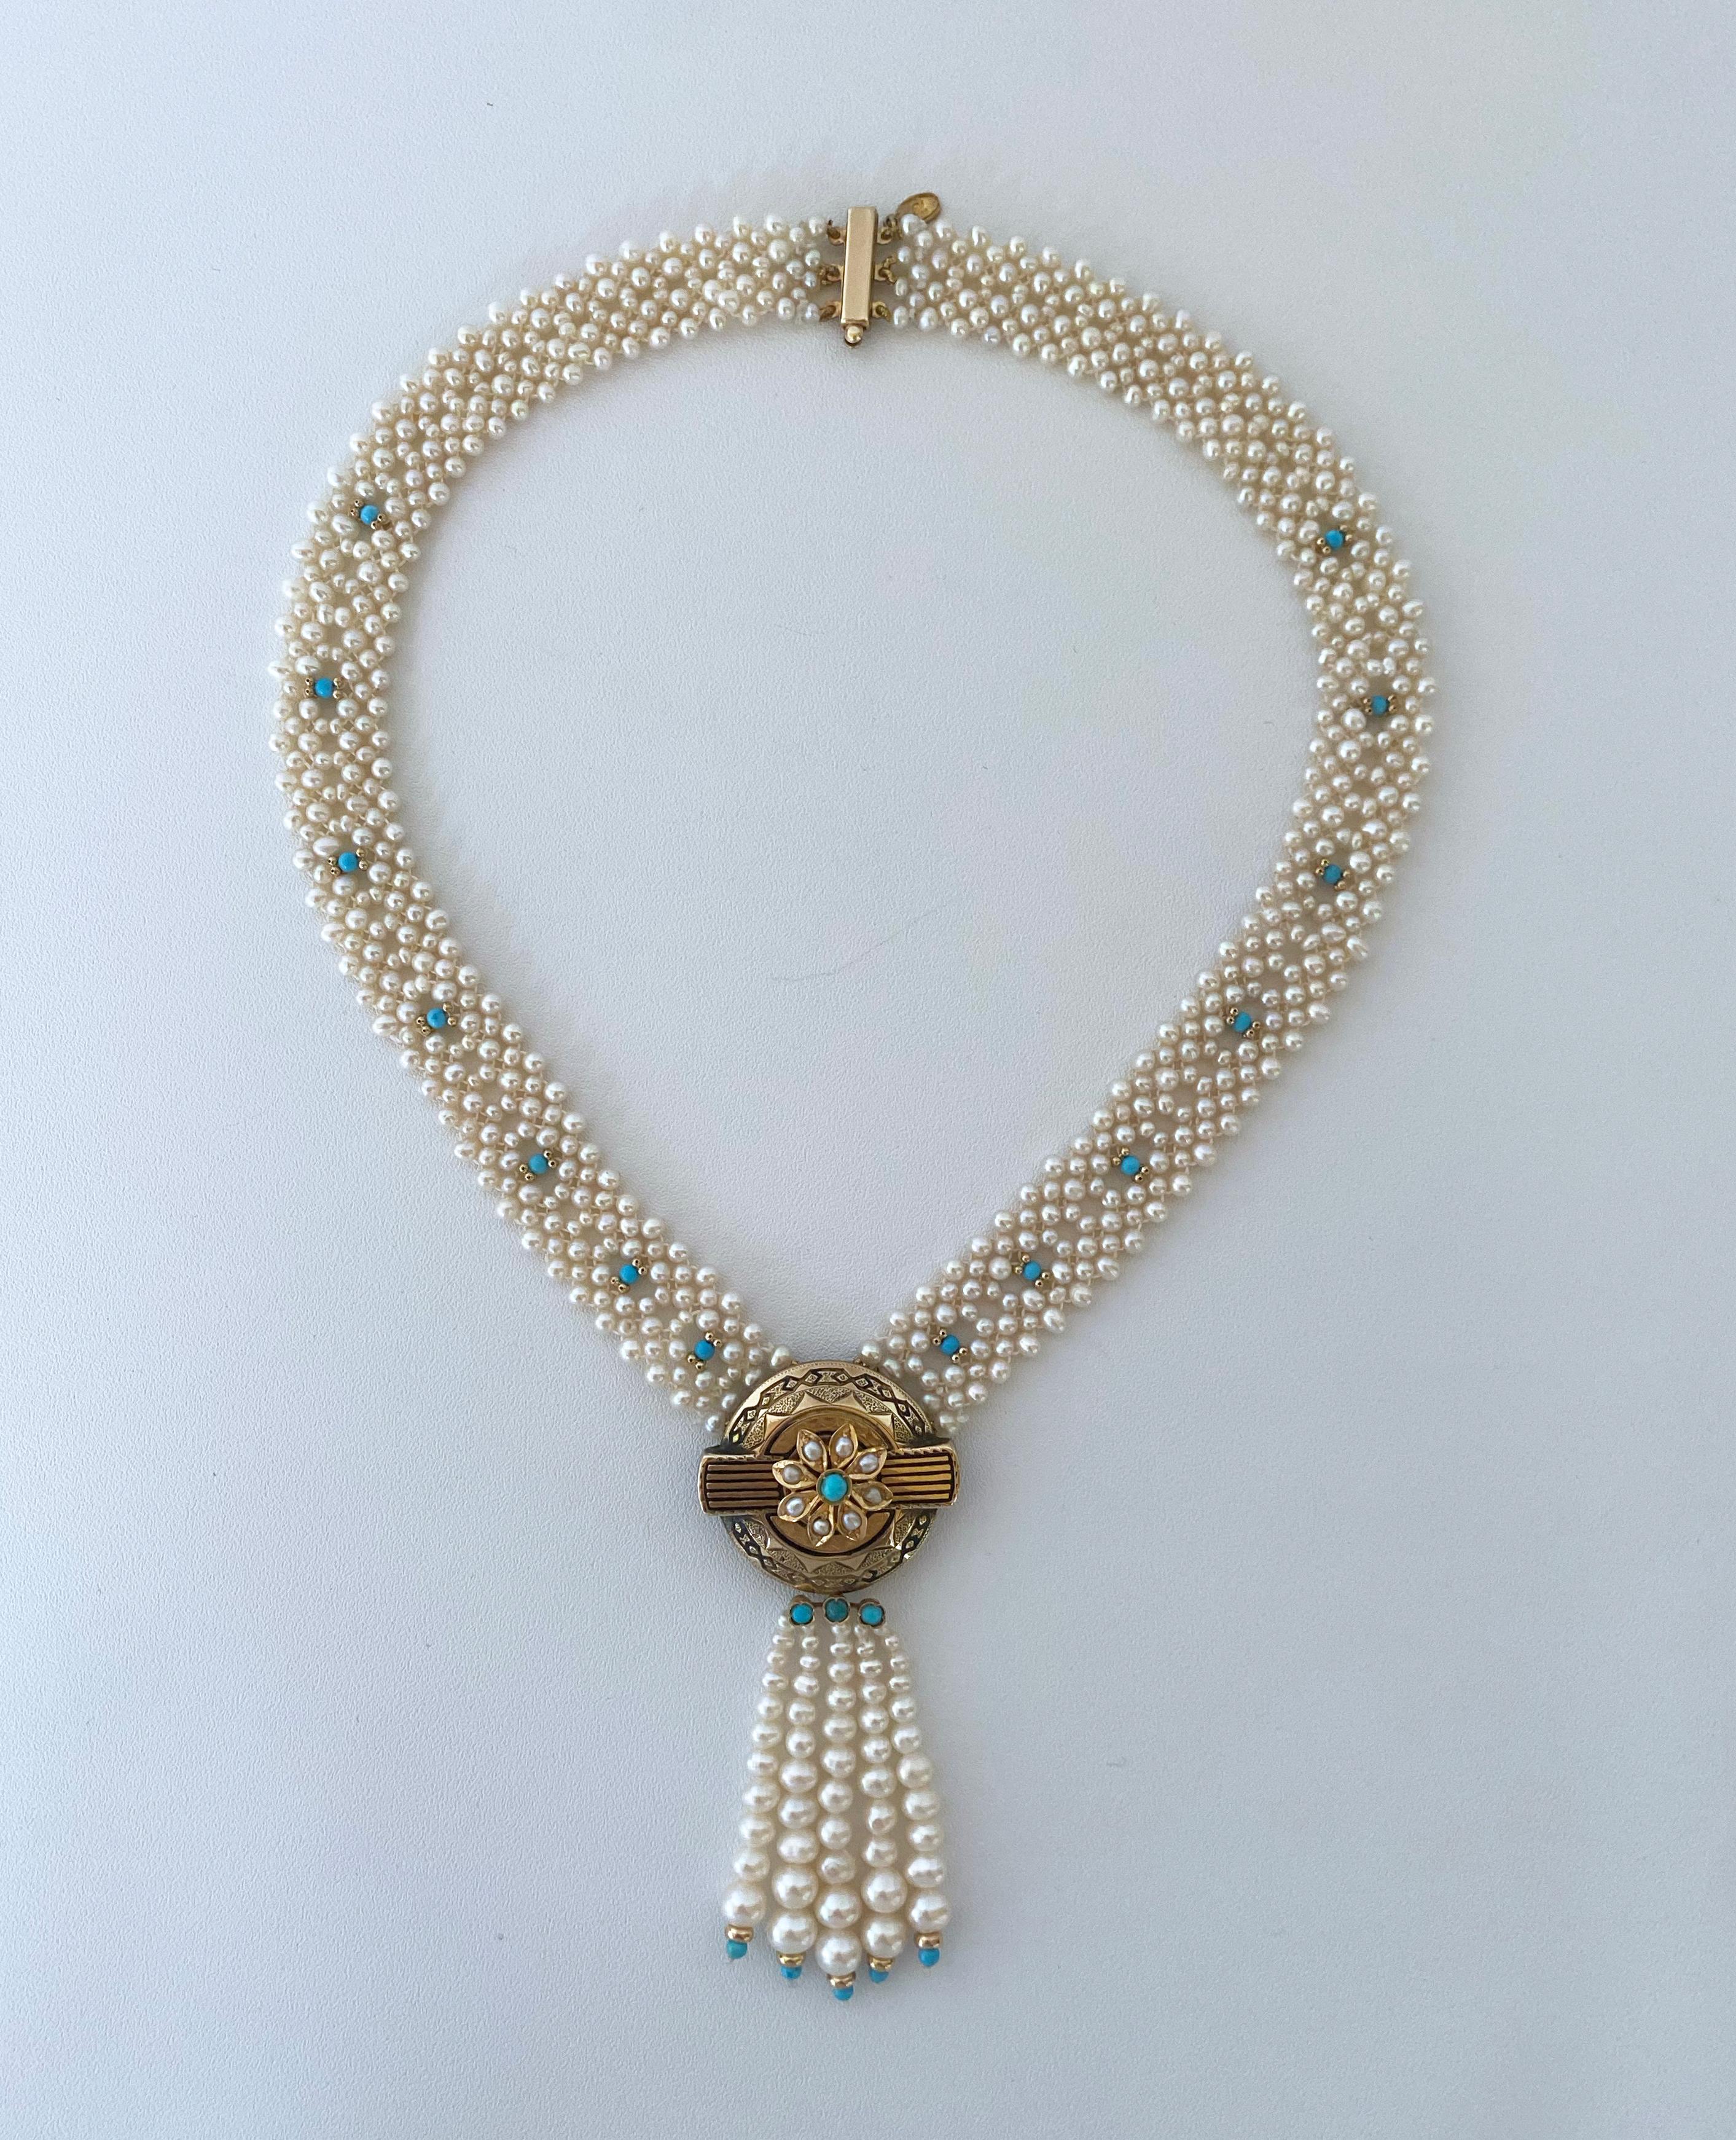 Marina J. Woven Pearl and Turquoise Necklace with 14K Yellow Gold Centerpiece  1